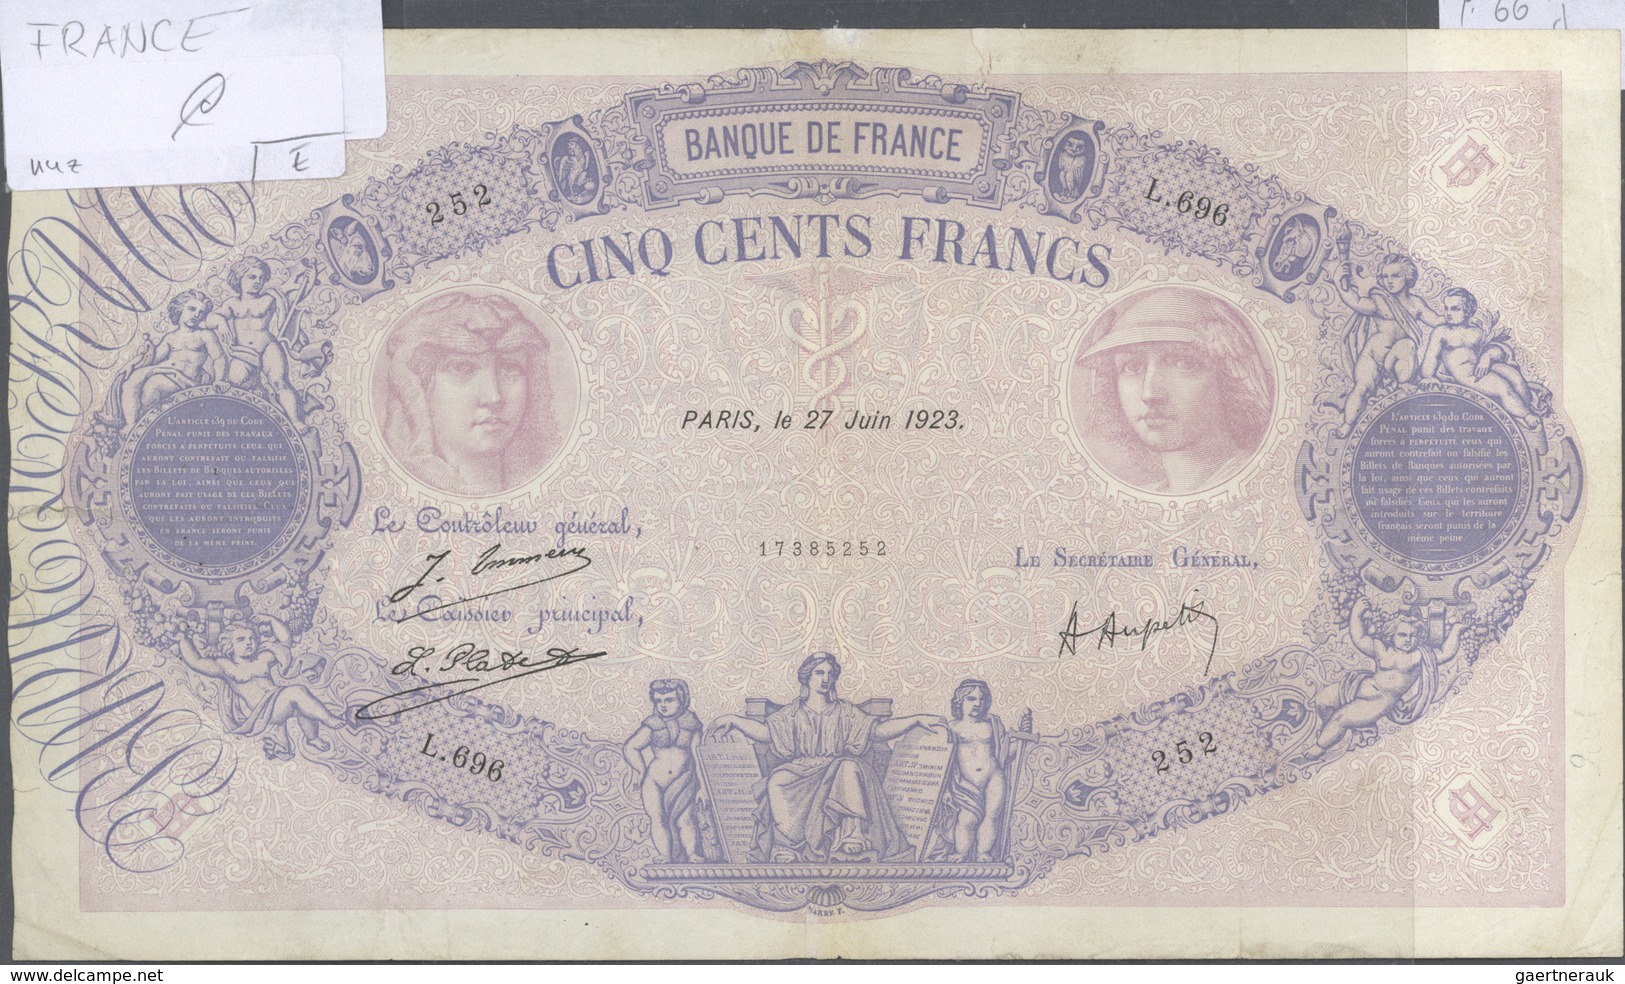 01472 France / Frankreich: set of 12 large size banknotes containing 500 Francs 1920 P. 66h (F), 500 Franc